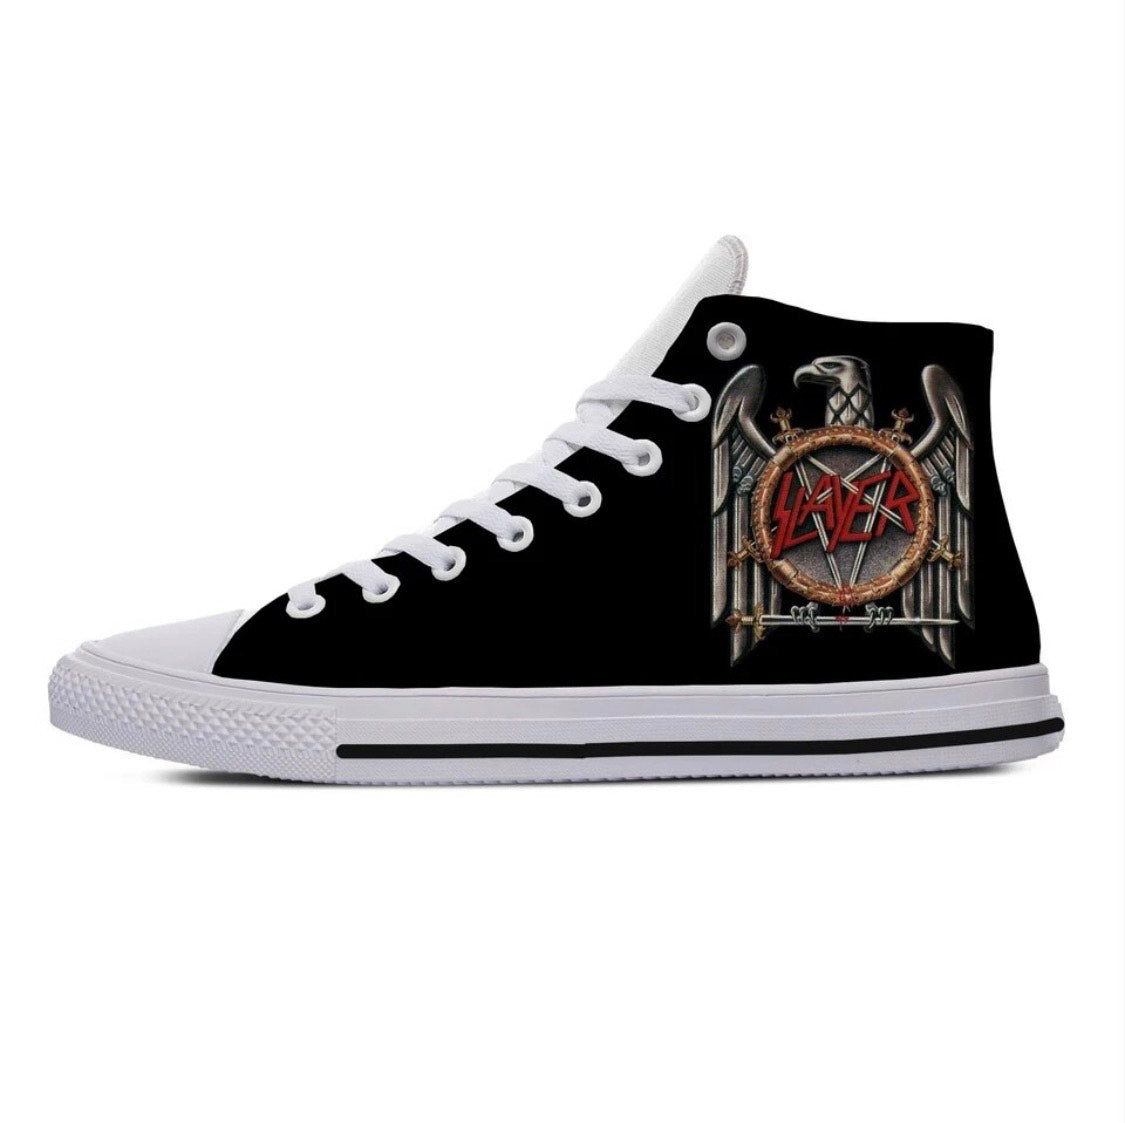 Slayer shoes